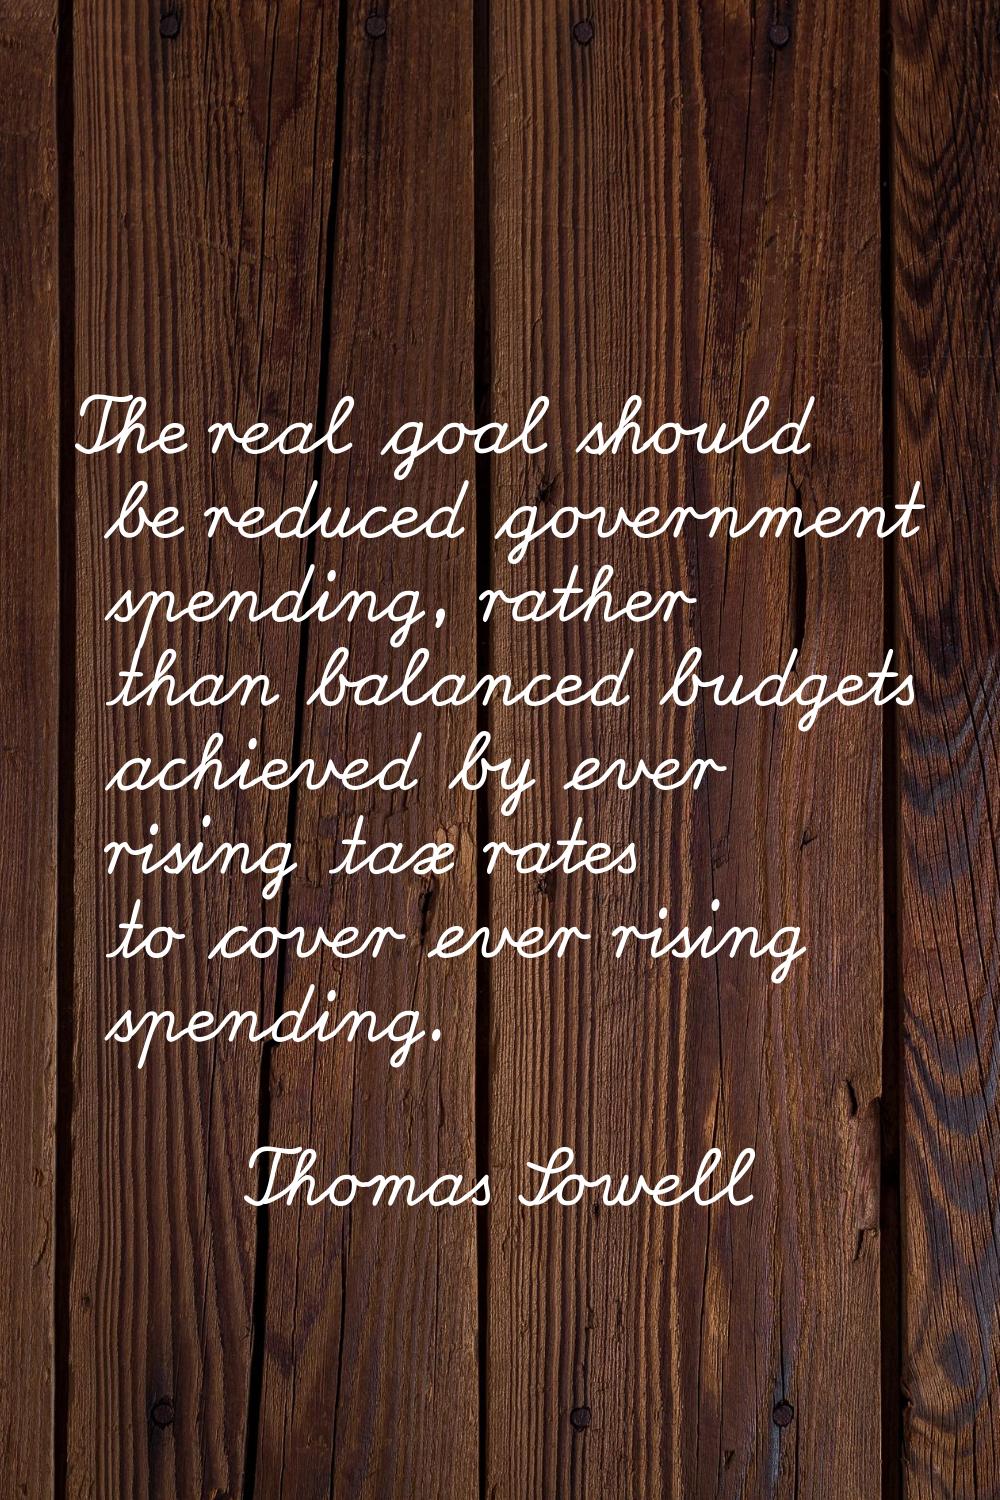 The real goal should be reduced government spending, rather than balanced budgets achieved by ever 